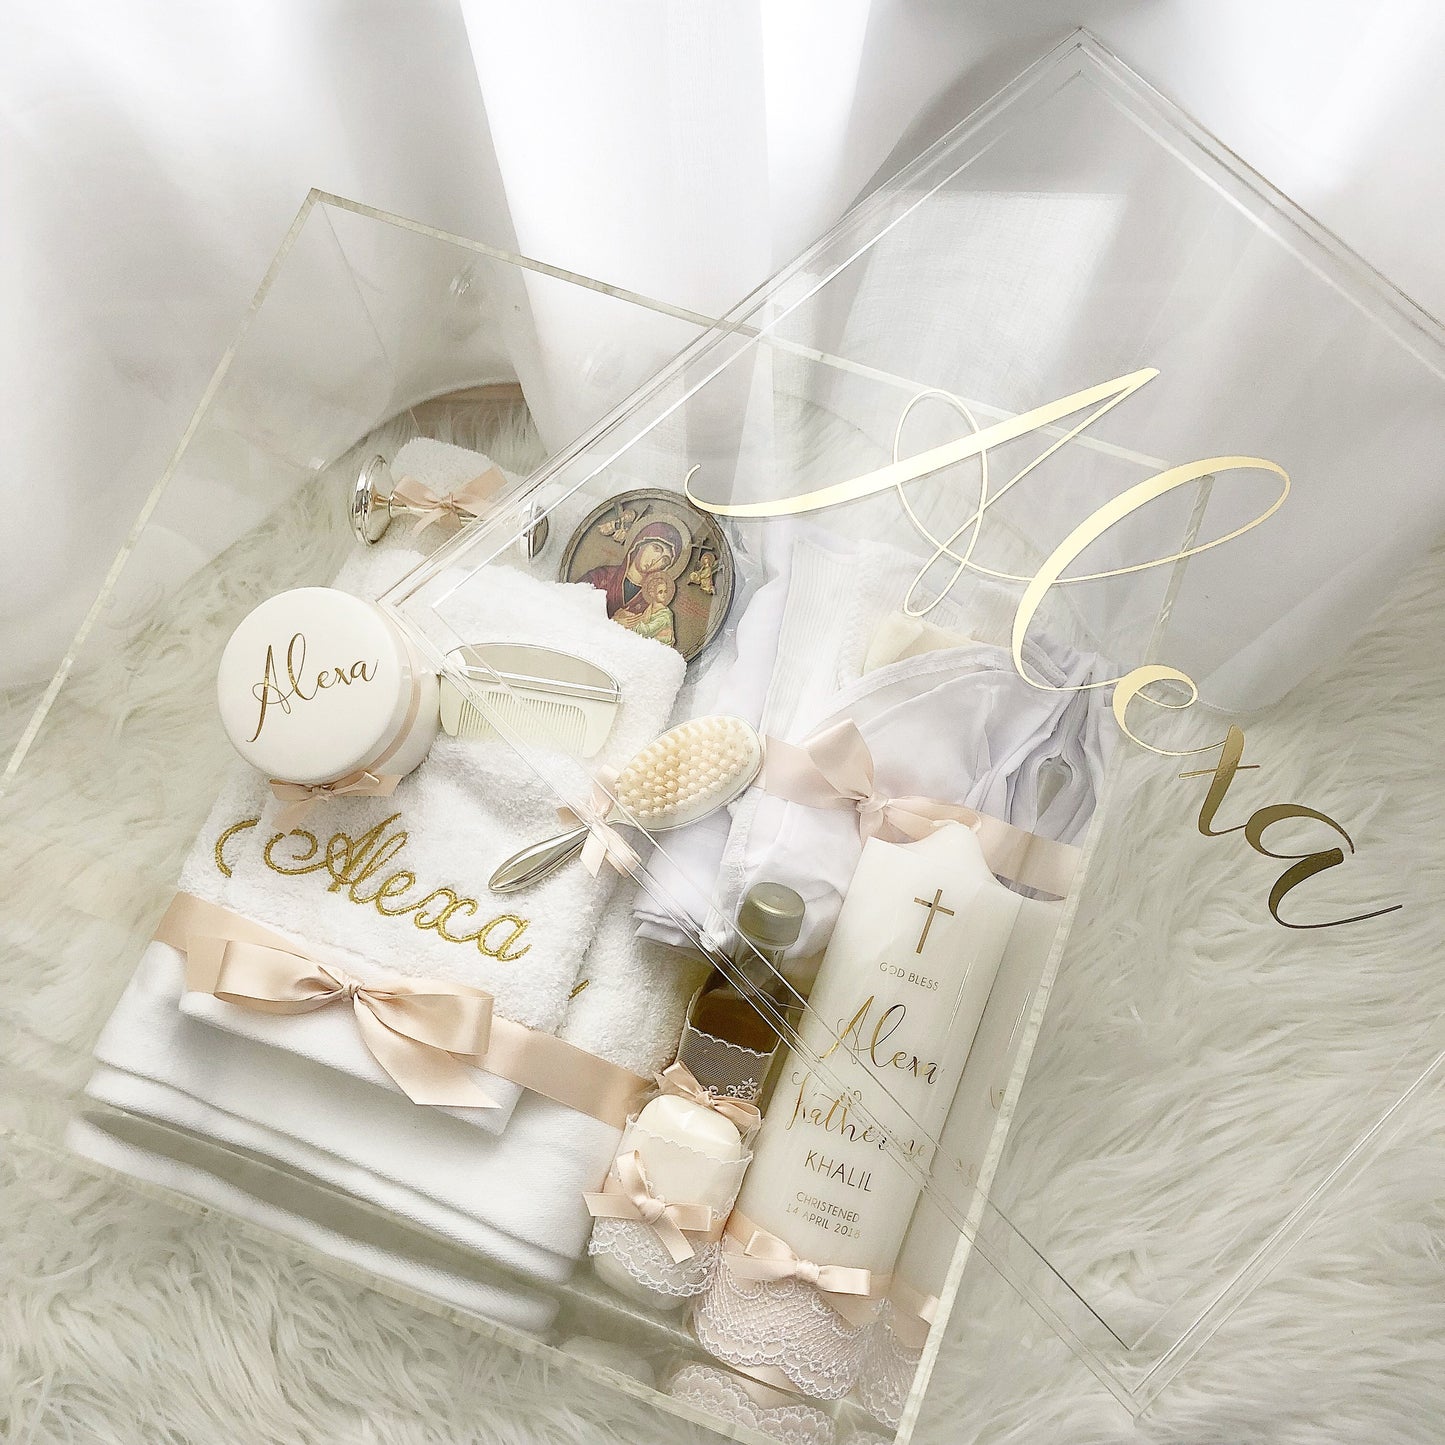 Luxe Catholic Package includes 1 x Embroidered Stole 1 x Embroidered Bath Towel 1 x Embroidered Hand Towel 1 x Baptism Candle 1 x Brush Set 1 x Rattle 1 x Trinket Box